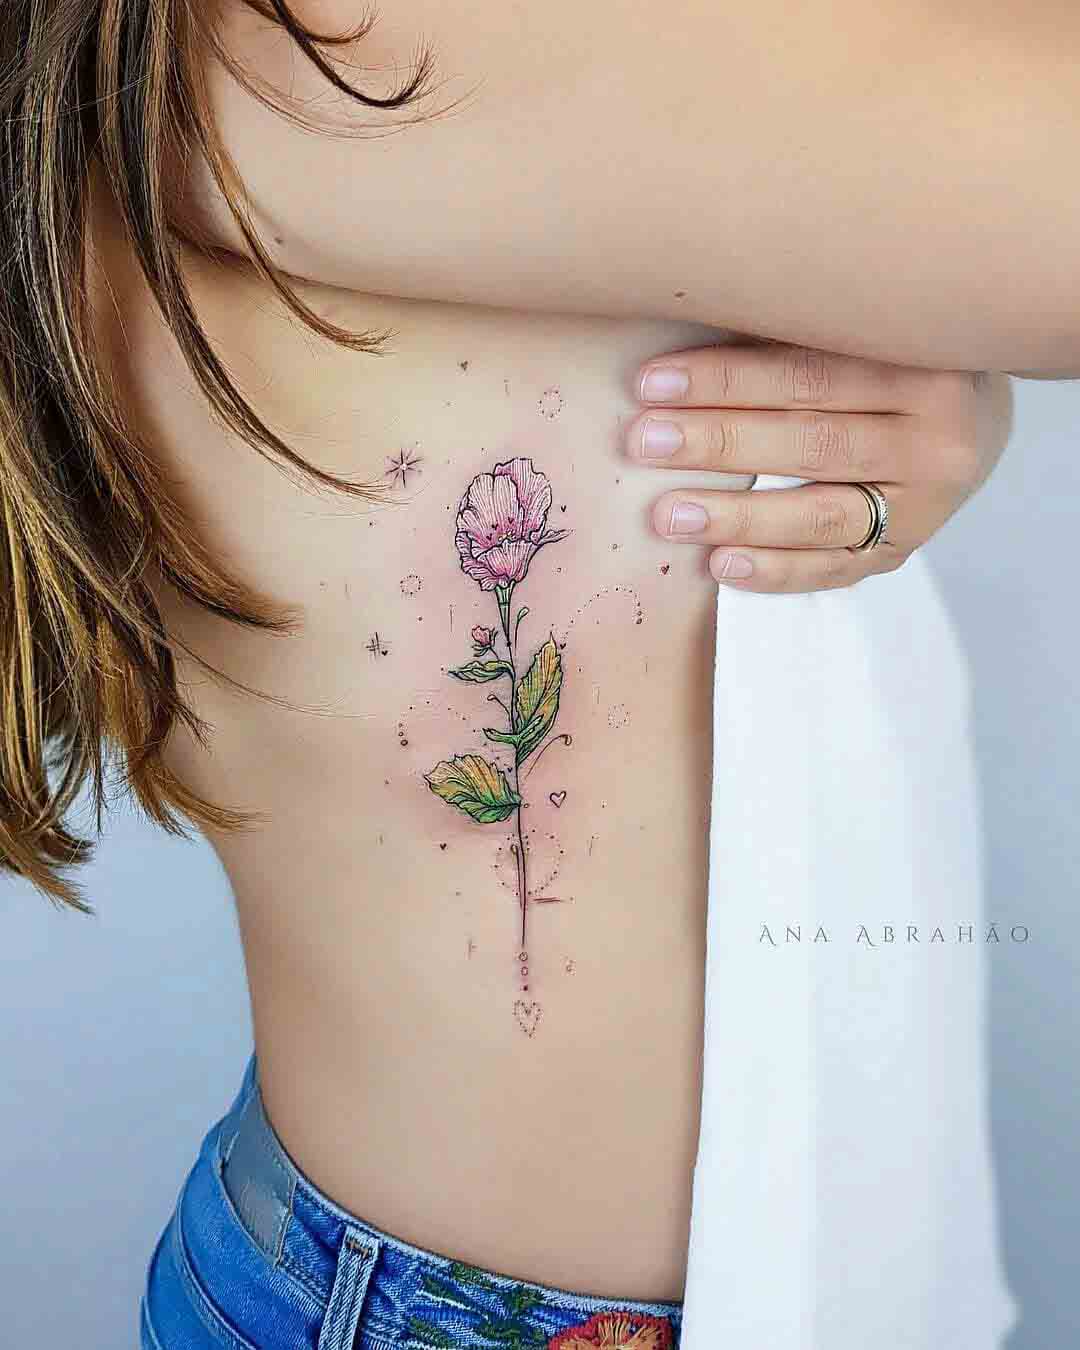 Inspired Ink Tattoos  Flowers on the rib cage Painful but pretty Tattoos  by Danan  Facebook